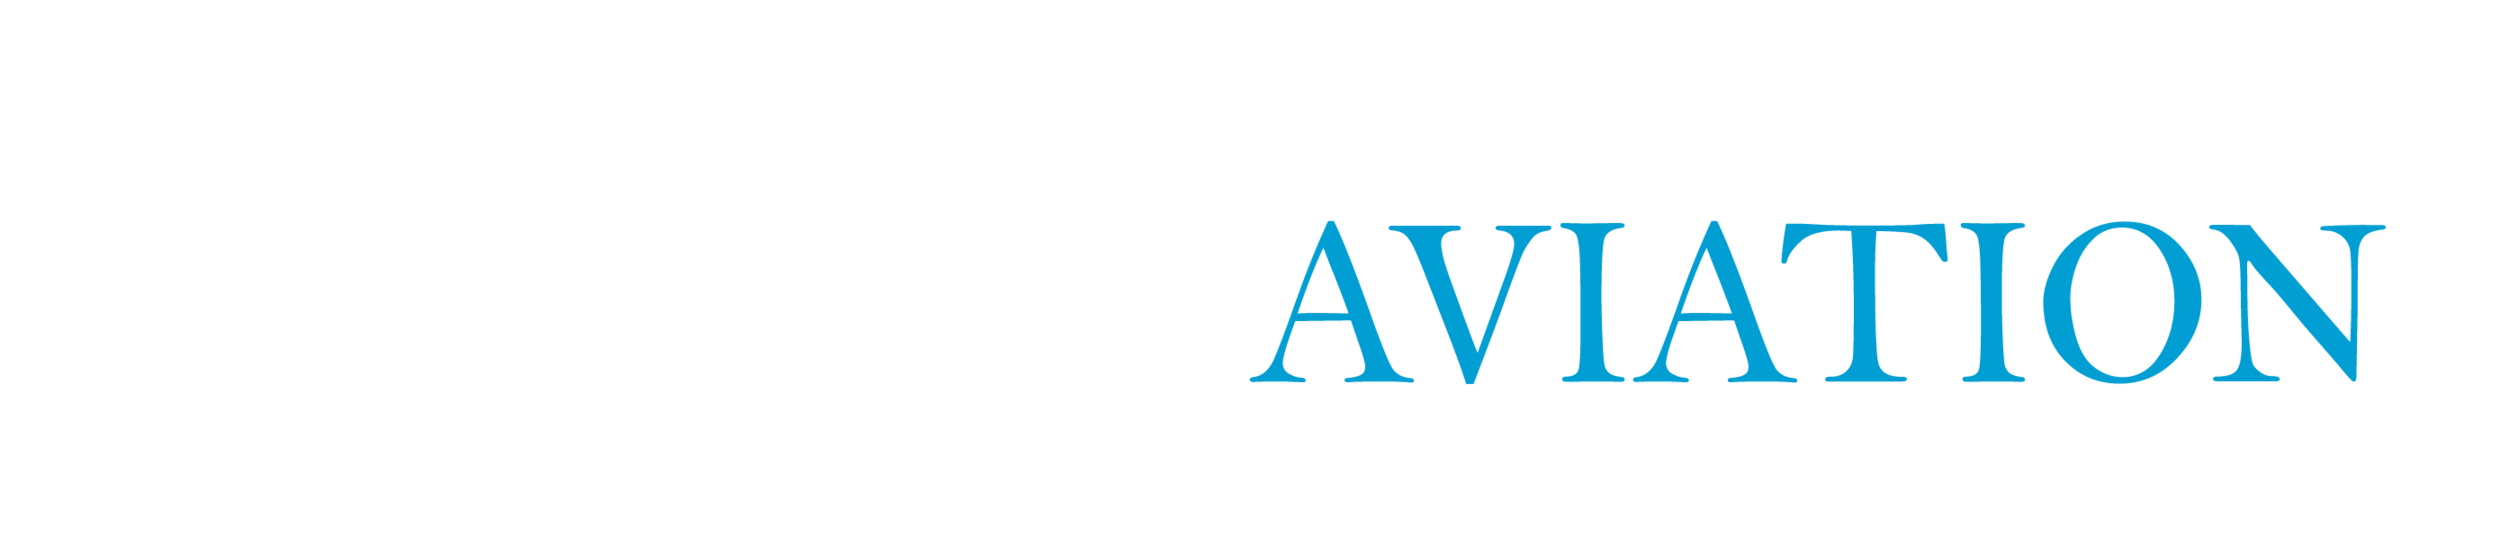 Legacy Aviation Group 